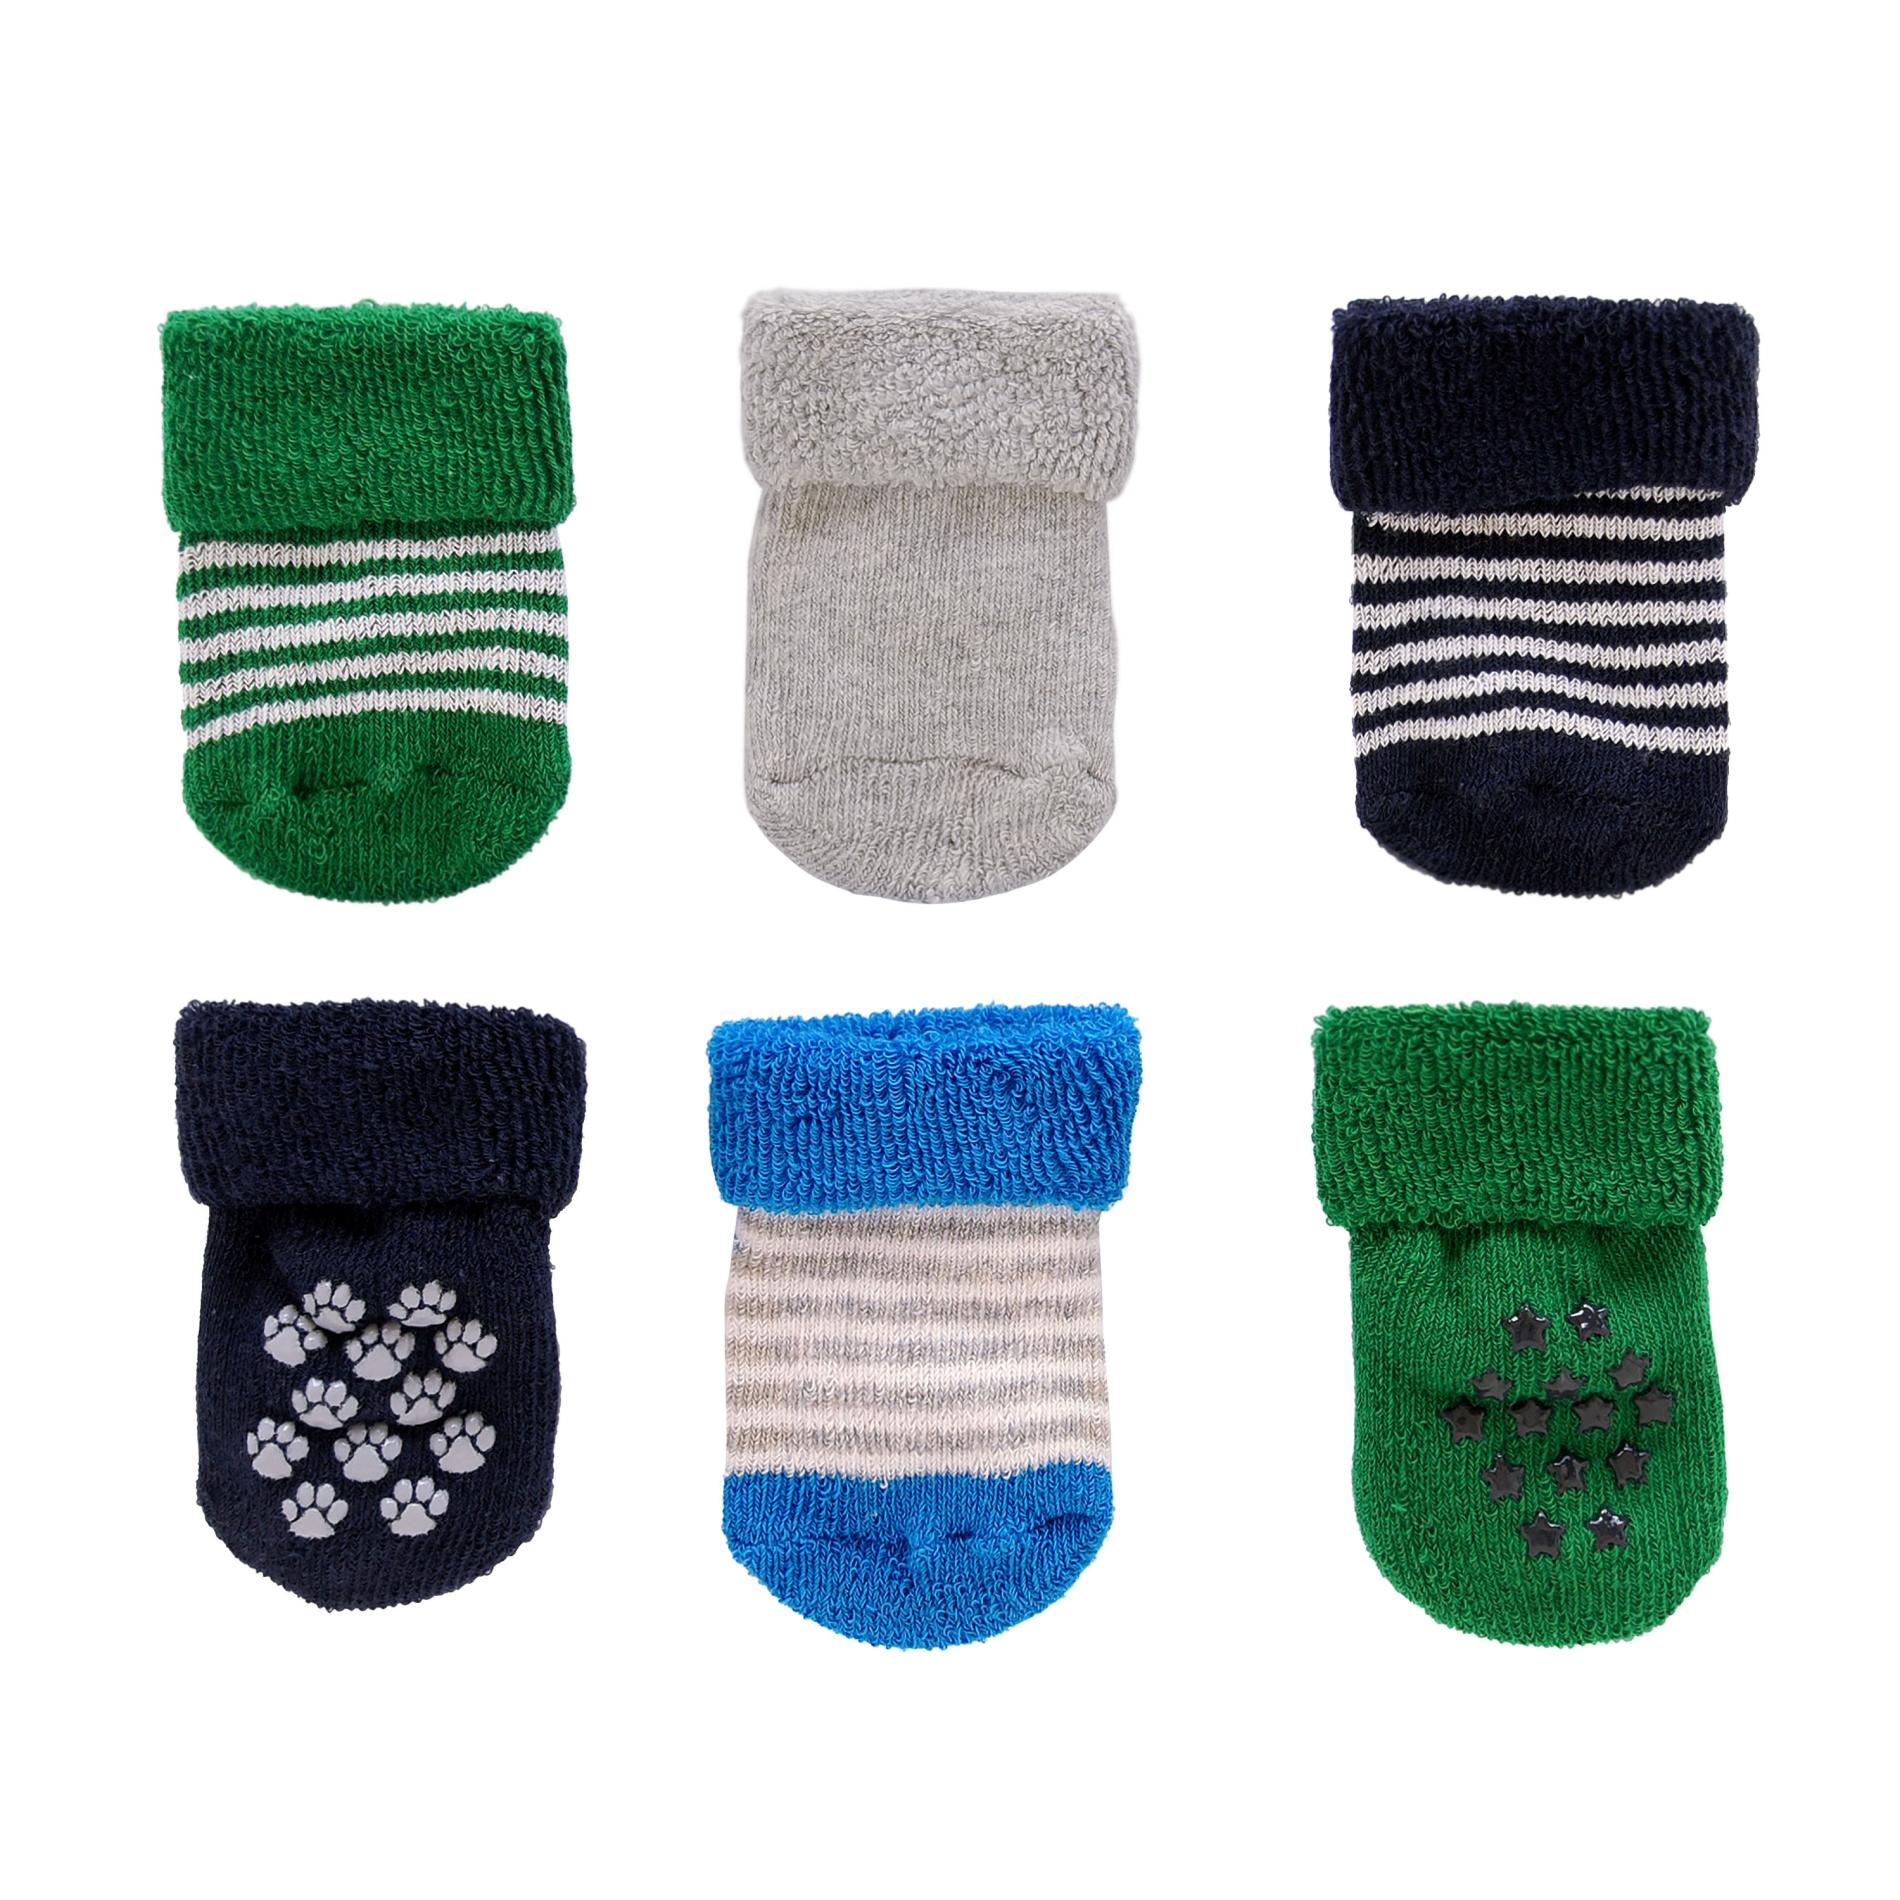 Carter's Newborn Boy's 6-Pairs French Terry Socks - Striped & Solid